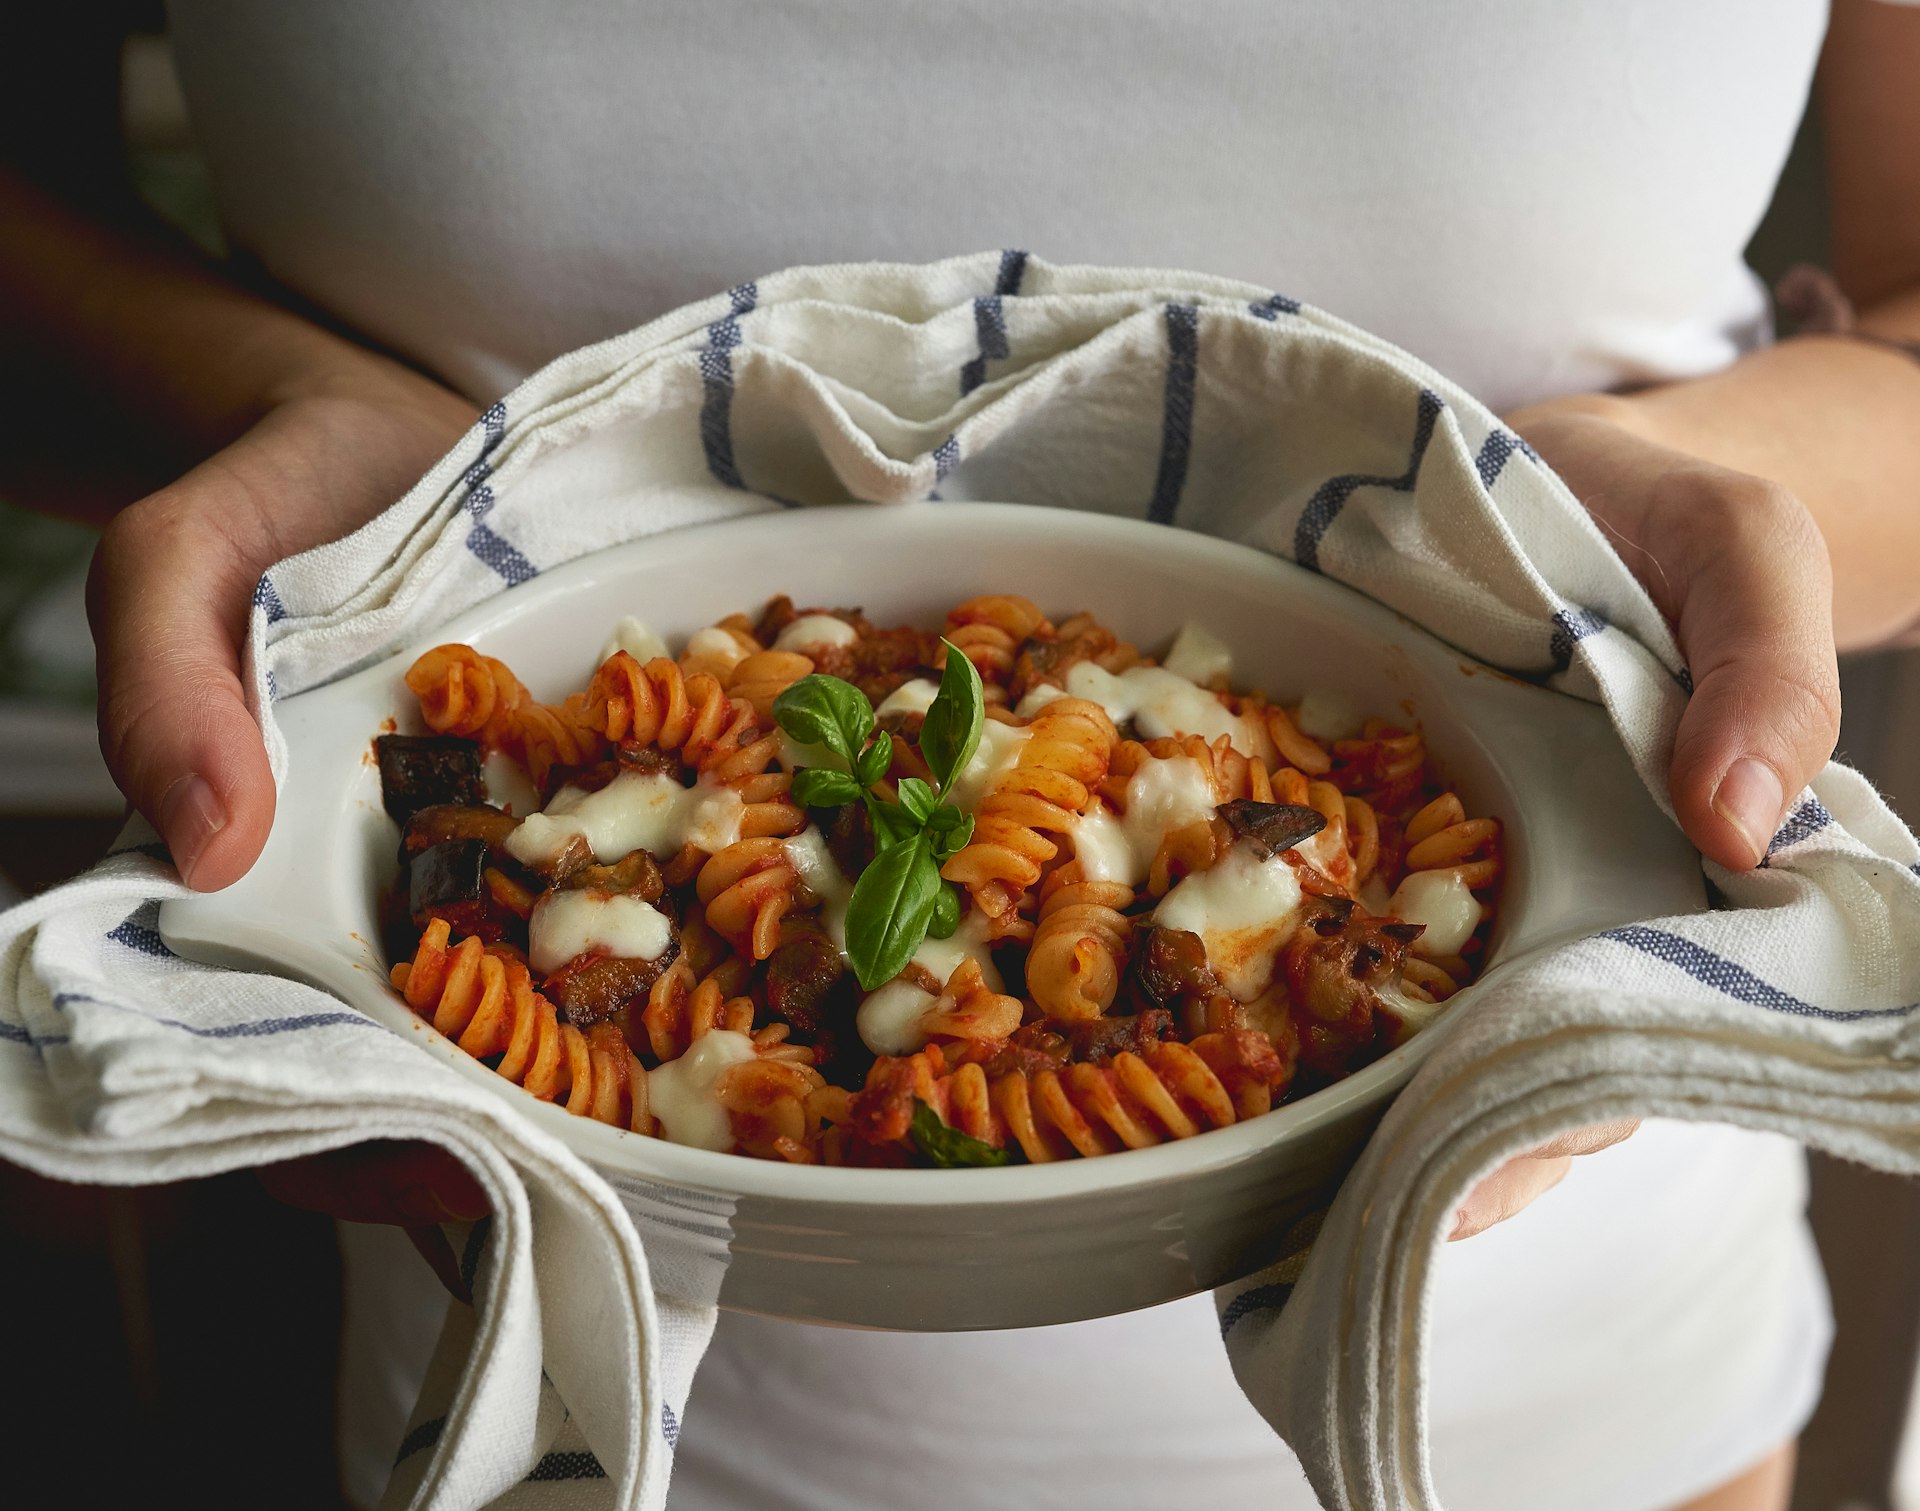 A homemade dish of fusilli pasta "alla Norma", a typical Sicilian dish made with fried aubergines, mozzarella or ricotta cheese, tomato sauce and basil. Mediterranean diet.